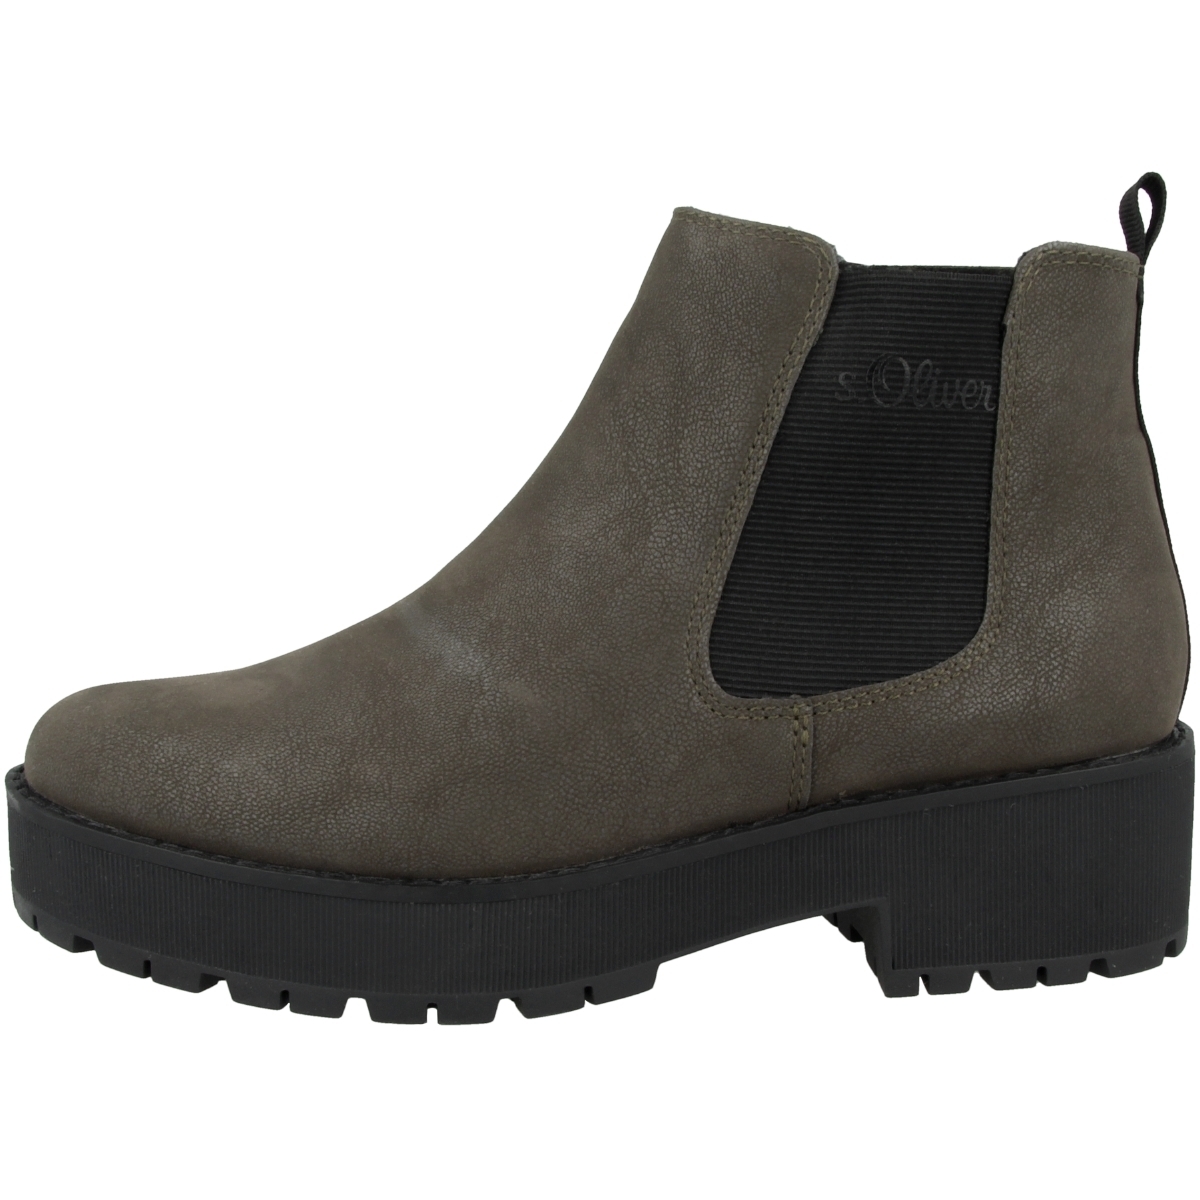 s.Oliver 5-26455-37 Chelsea Boots